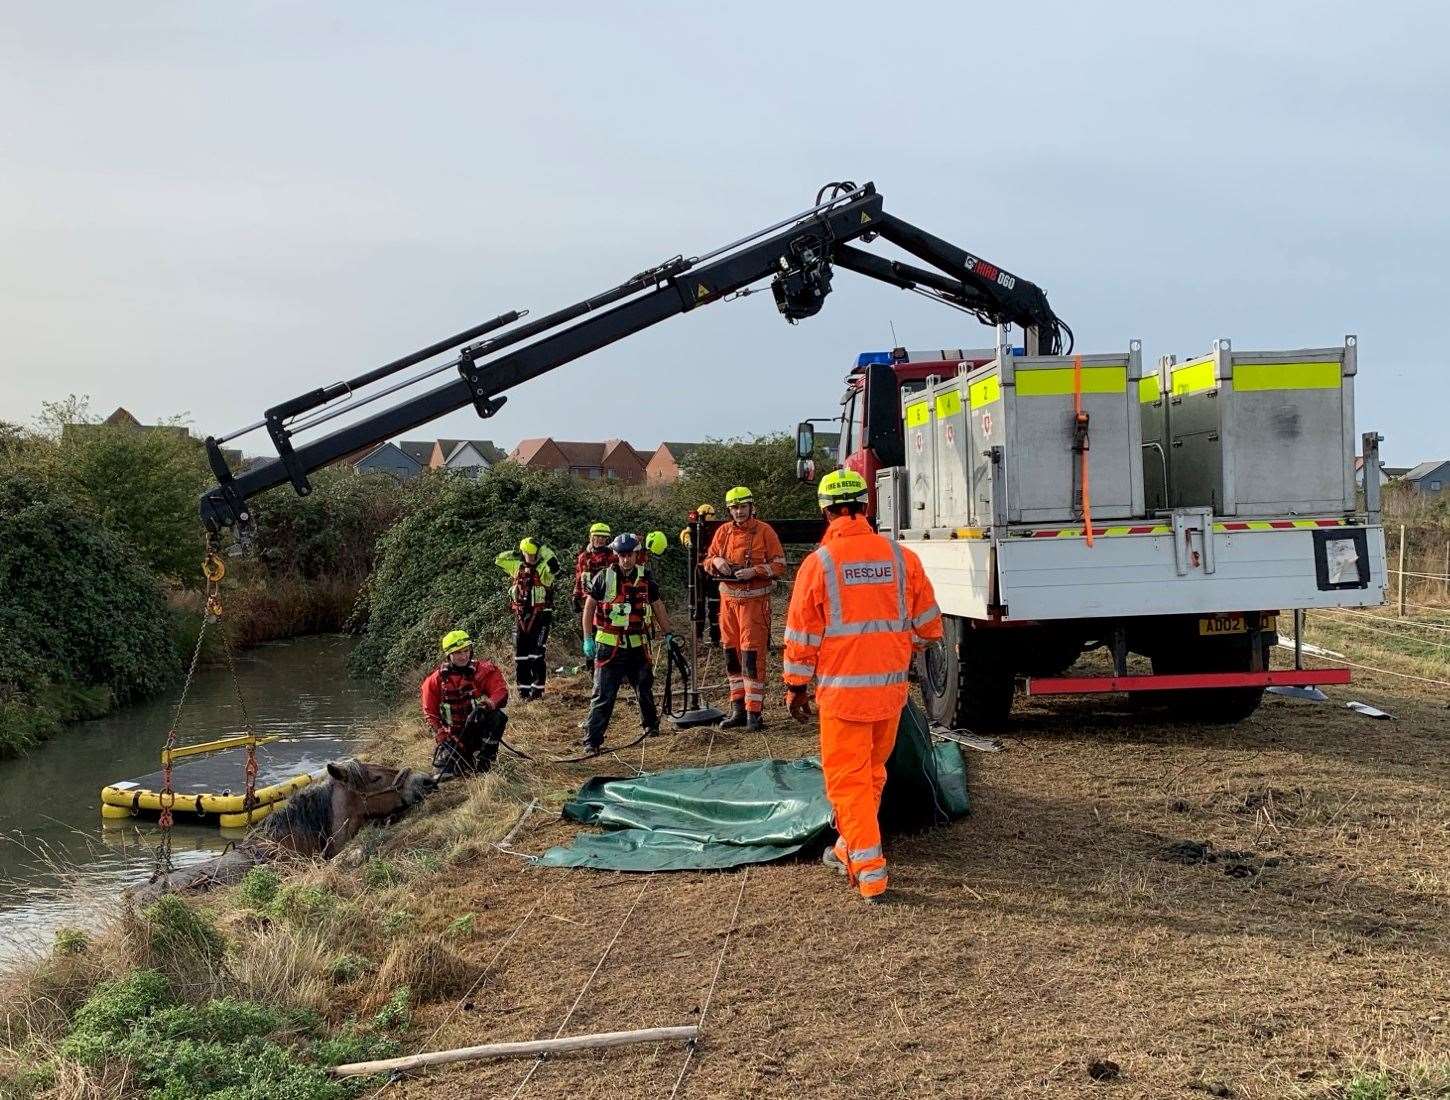 Crews used mud paths and a crane to lift Waffle the horse to safety. Photo: KFRS